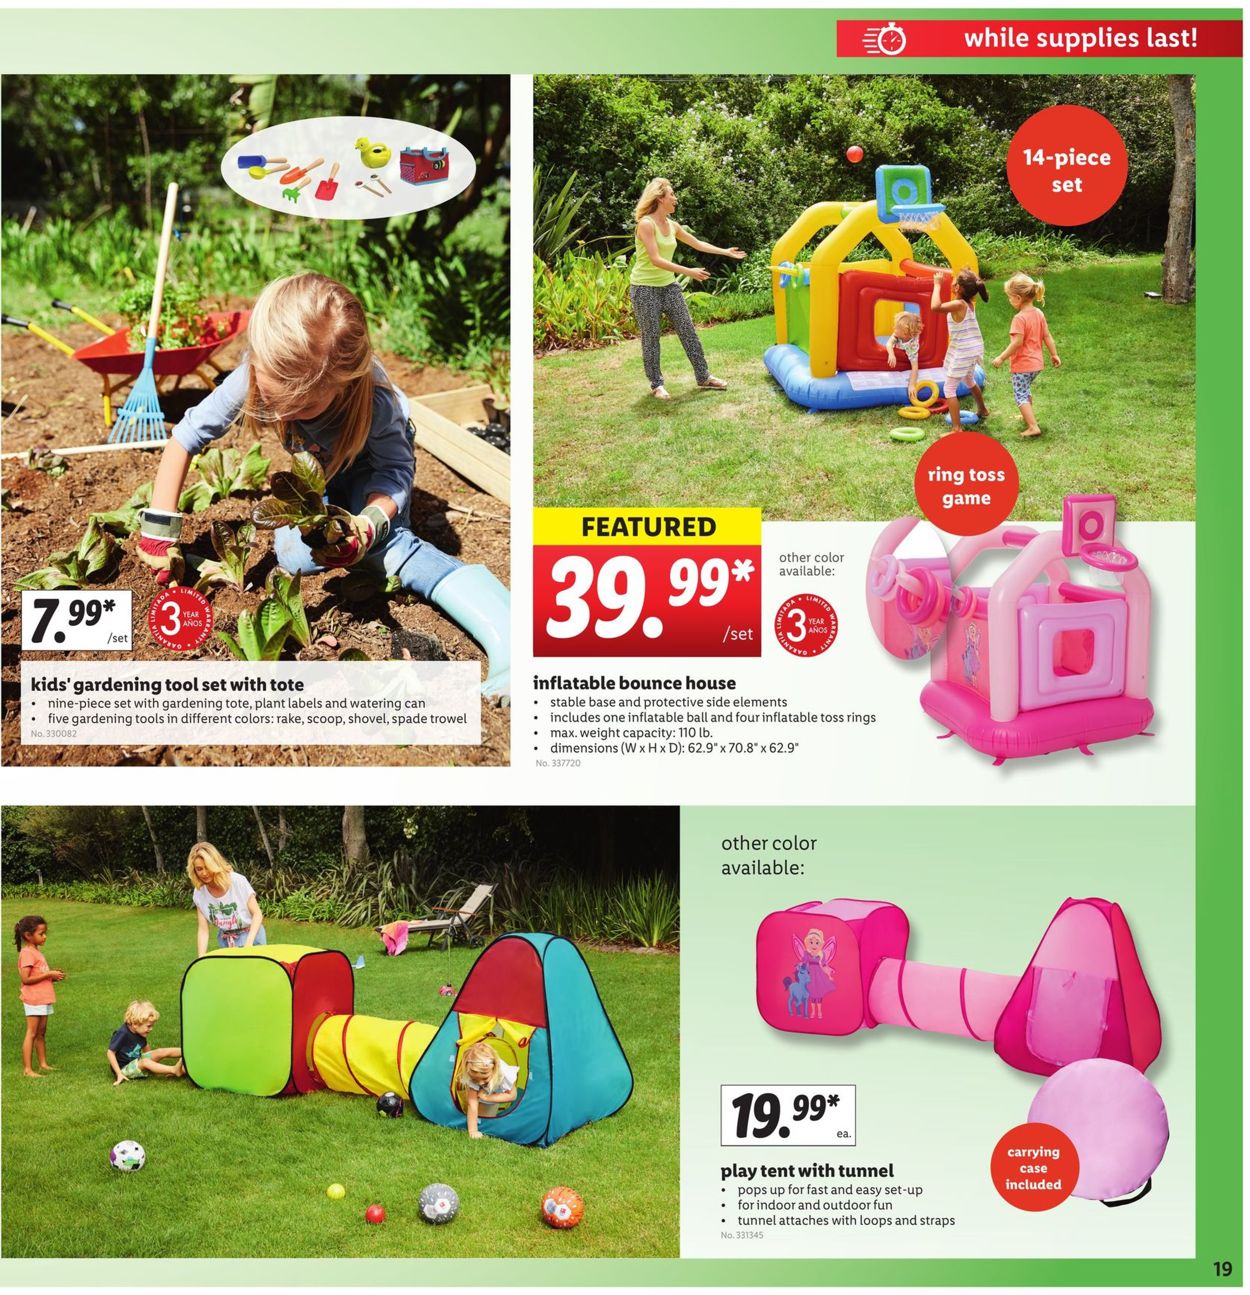 pop up play tent and tunnel lidl